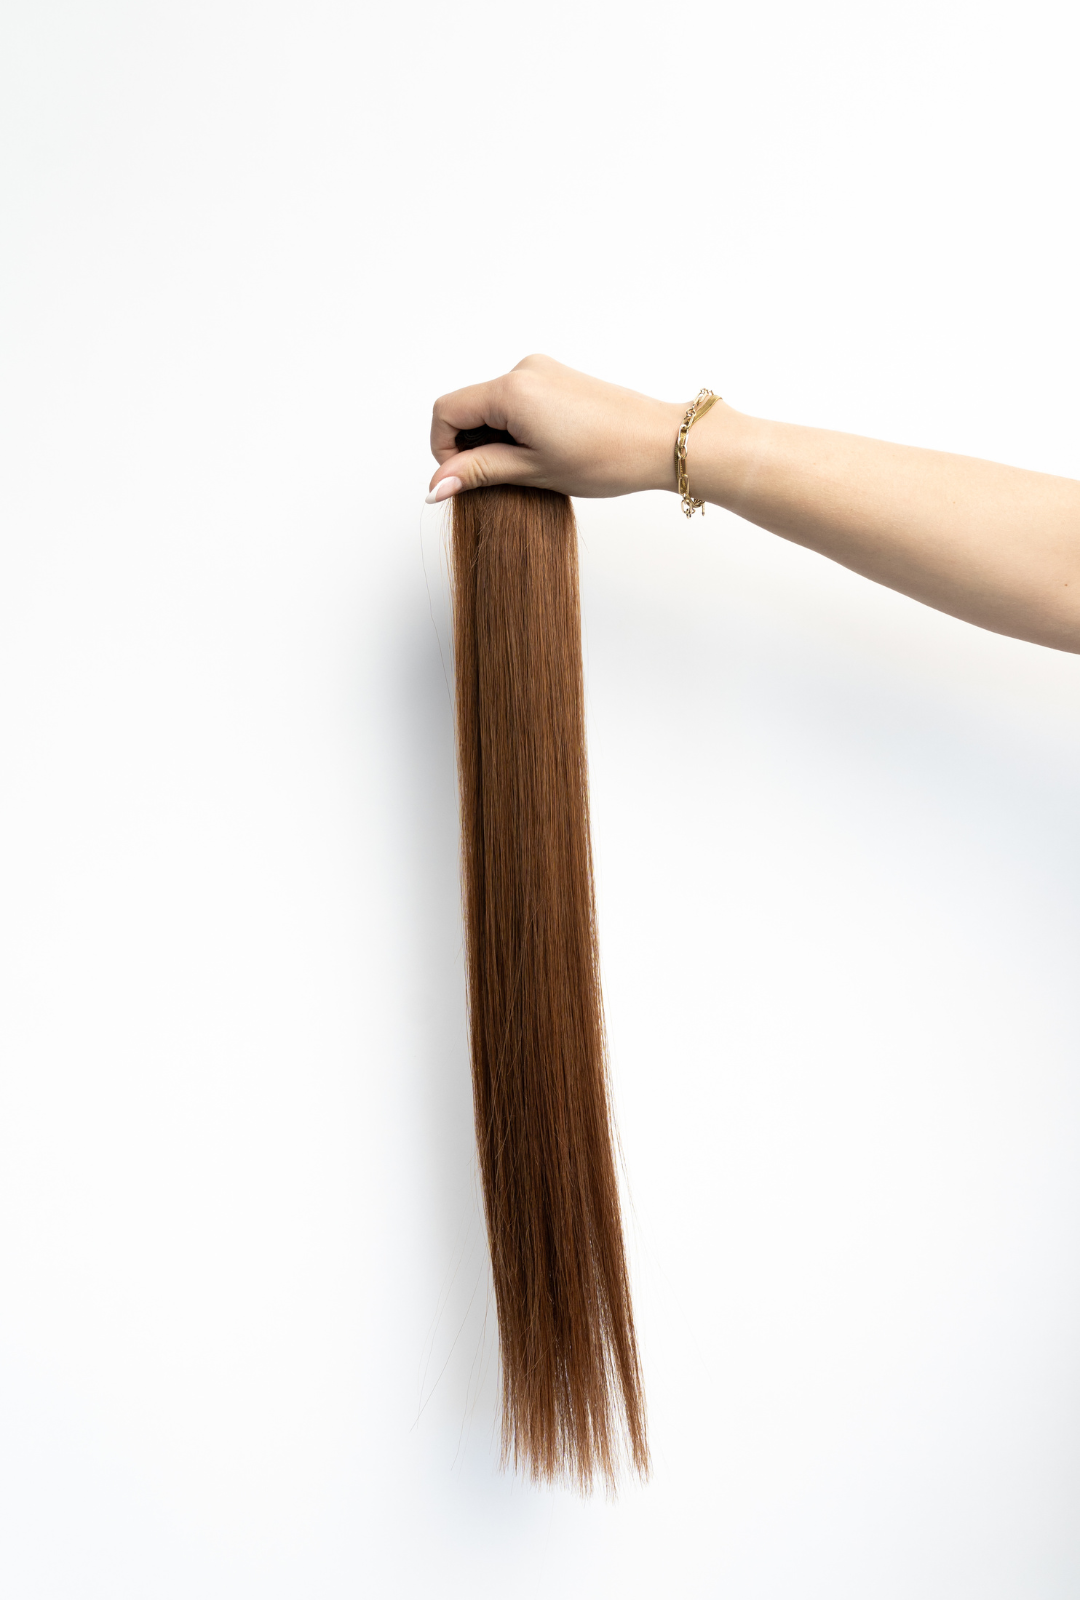 Laced Hair Keratin Bond Extensions #33 (Copper Penny)